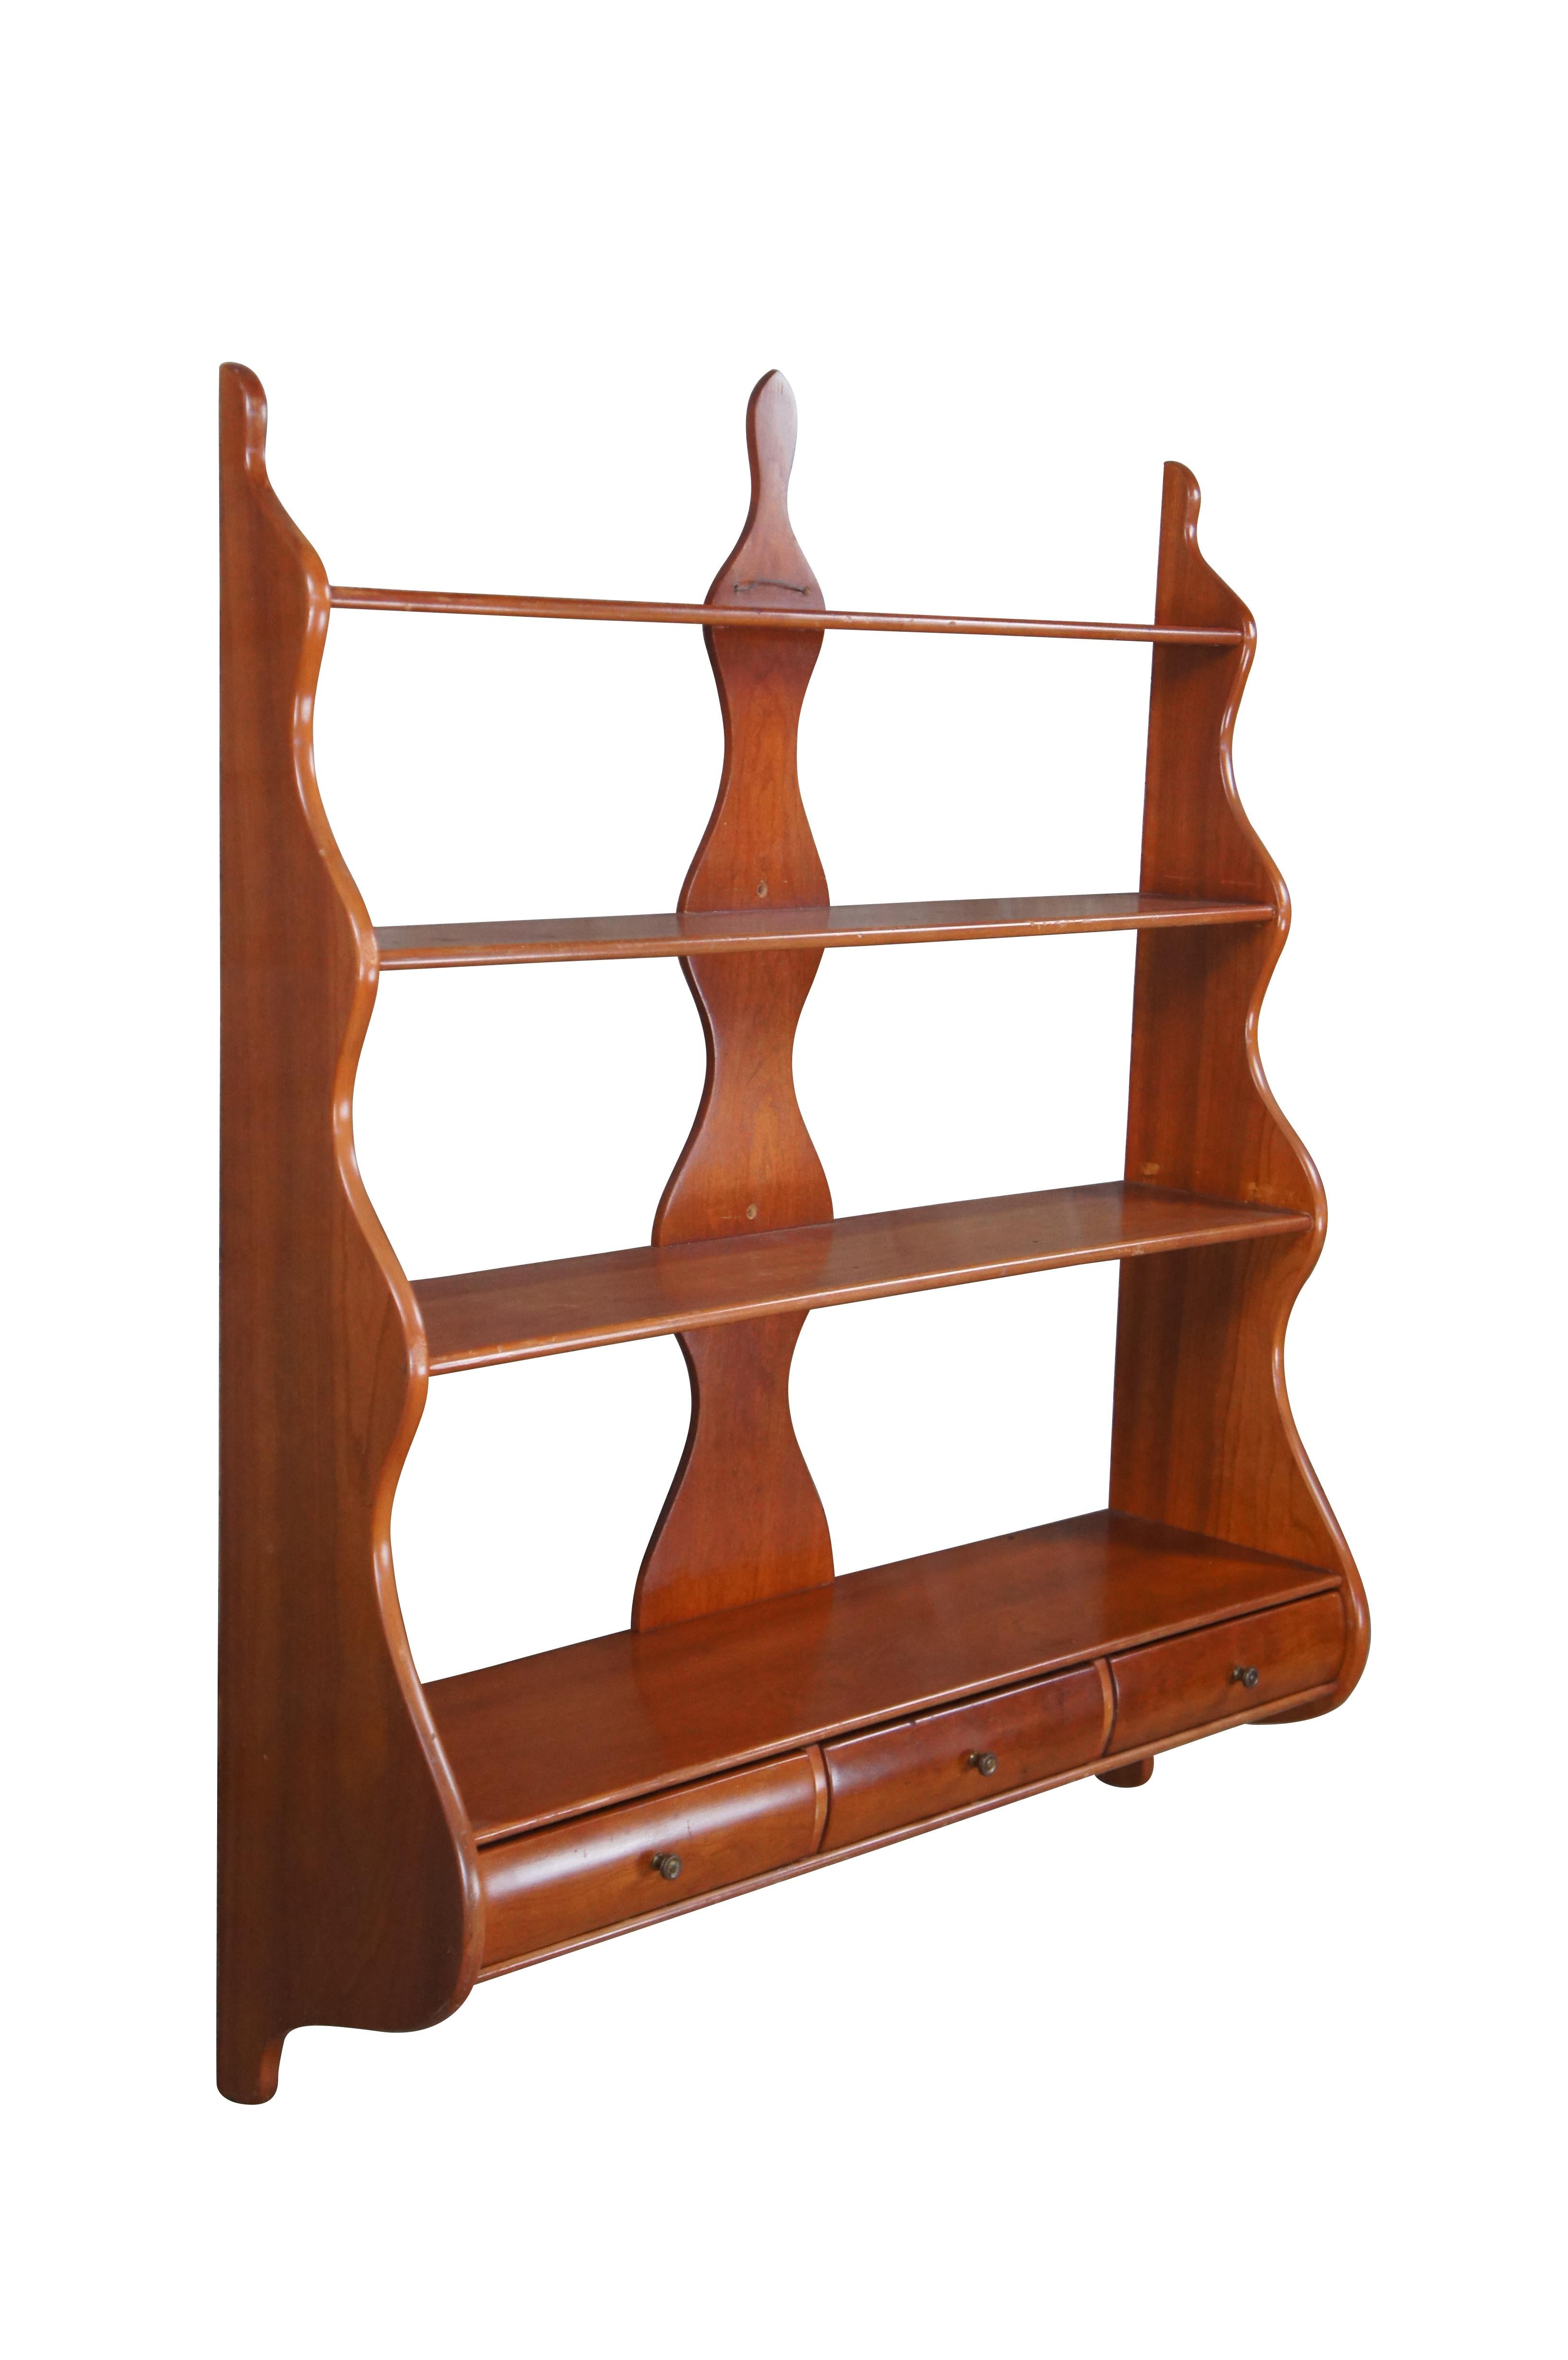 A large and impressive mid 20th century serpentine wall shelf. Made from solid cherry with four graduated tiers and three drawers with rabbet joint construction.

Dimensions:
32.75